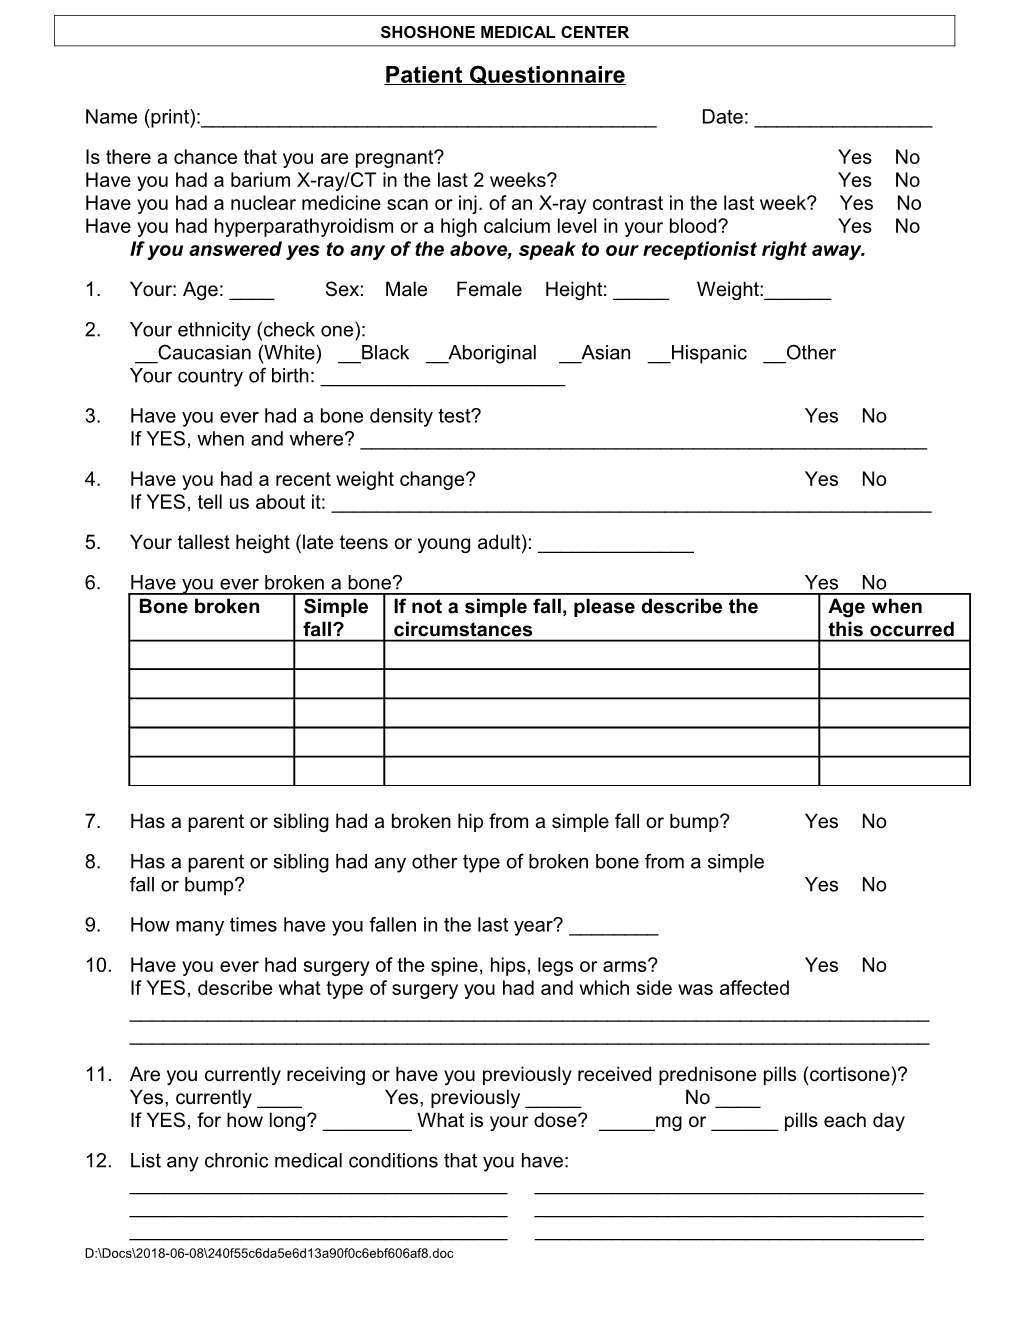 BMD Patient Intake Questionaire